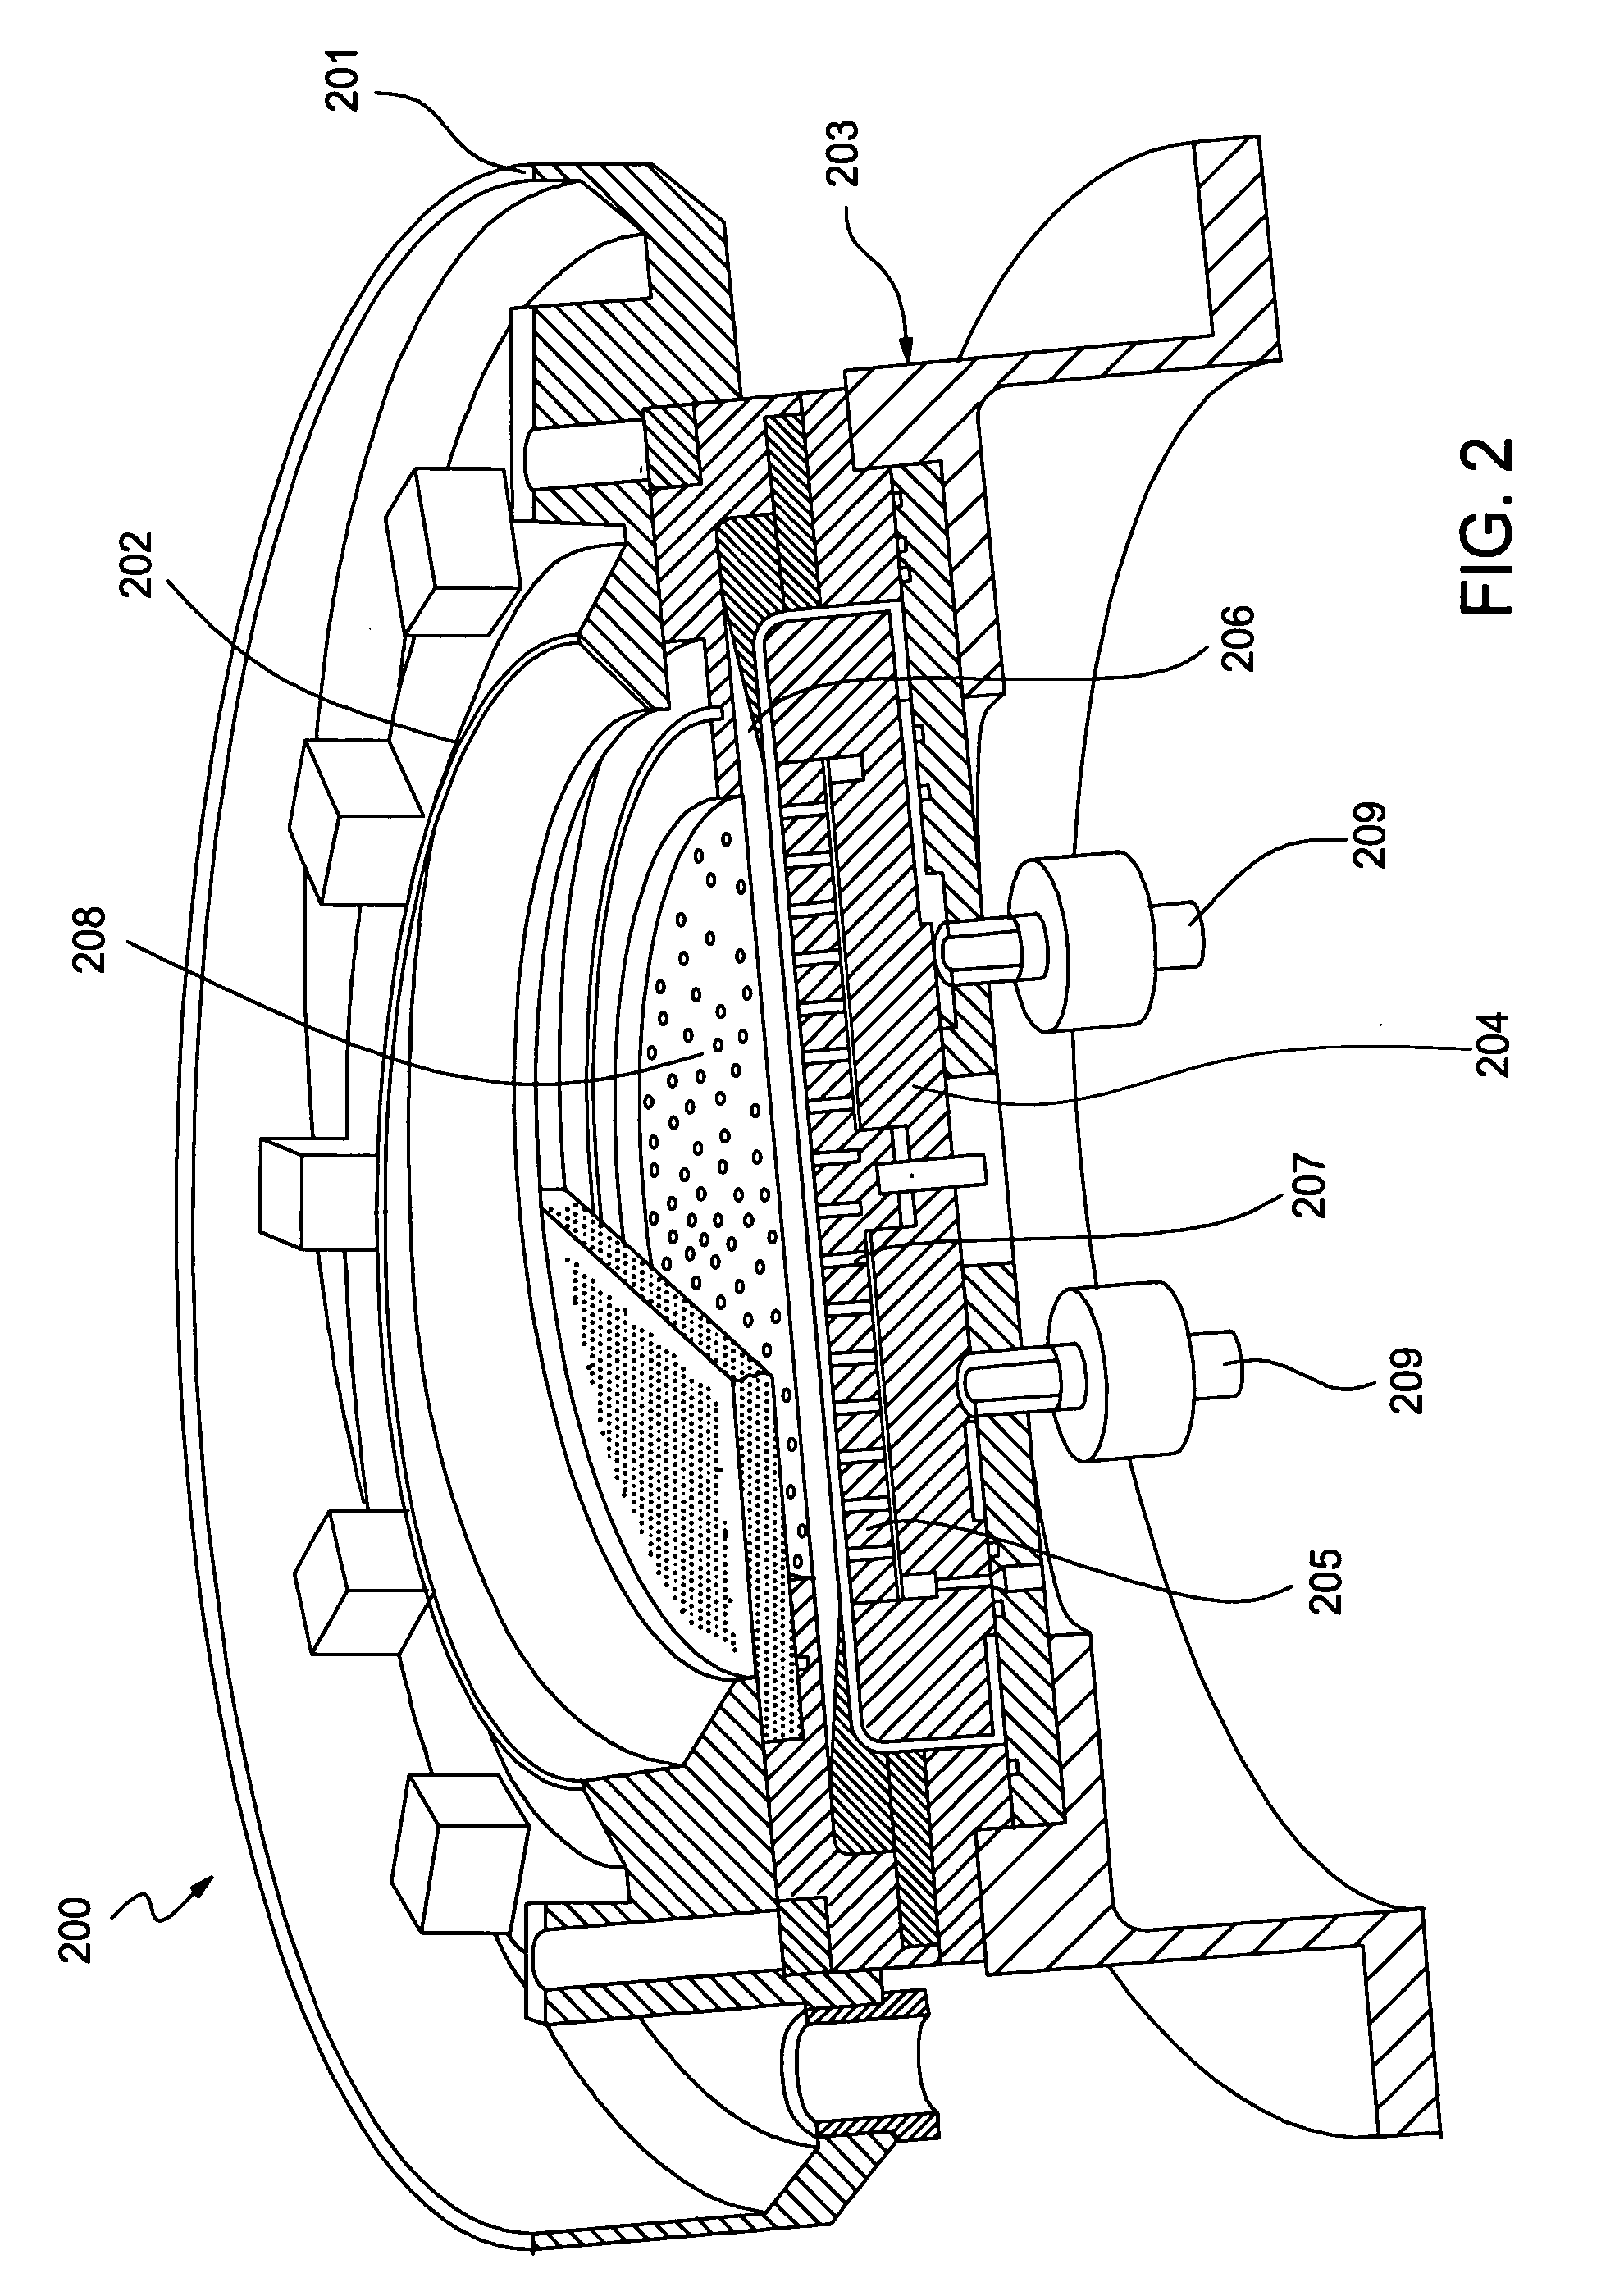 Electric field reducing thrust plate